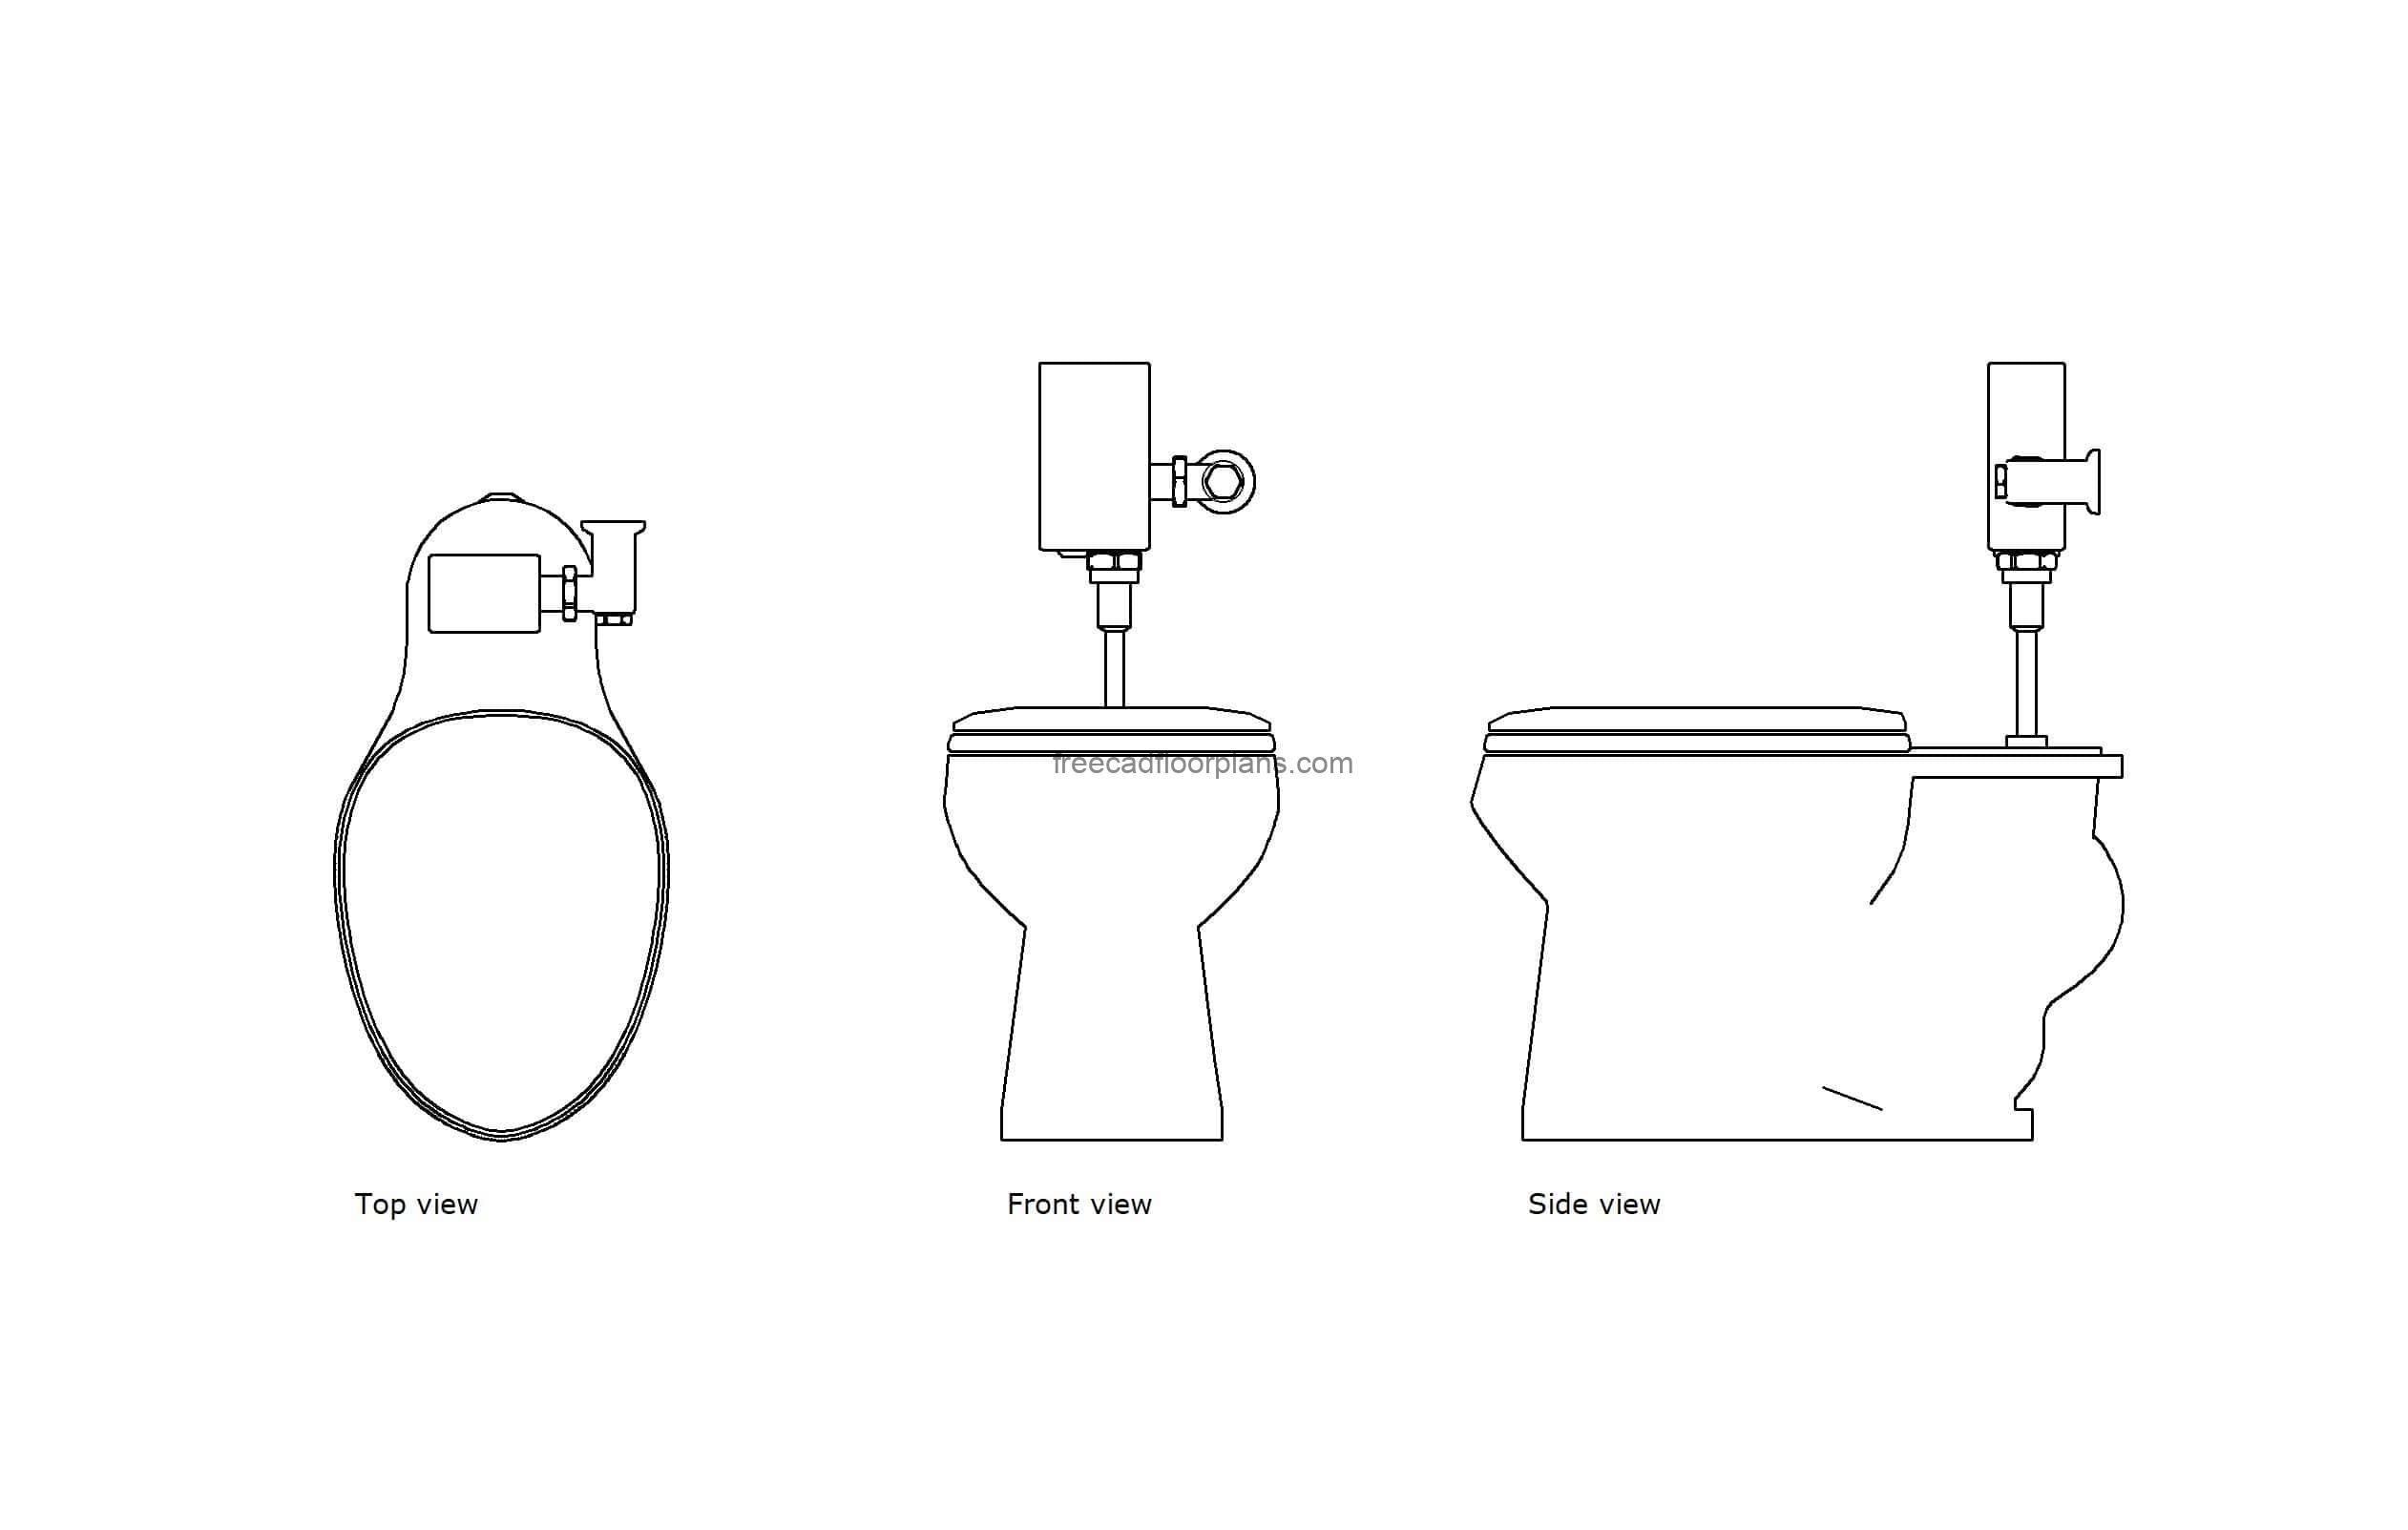 autocad drawing of a toilet with autoflush for commercial use, plan and elevation 2d views, dwg file free for download